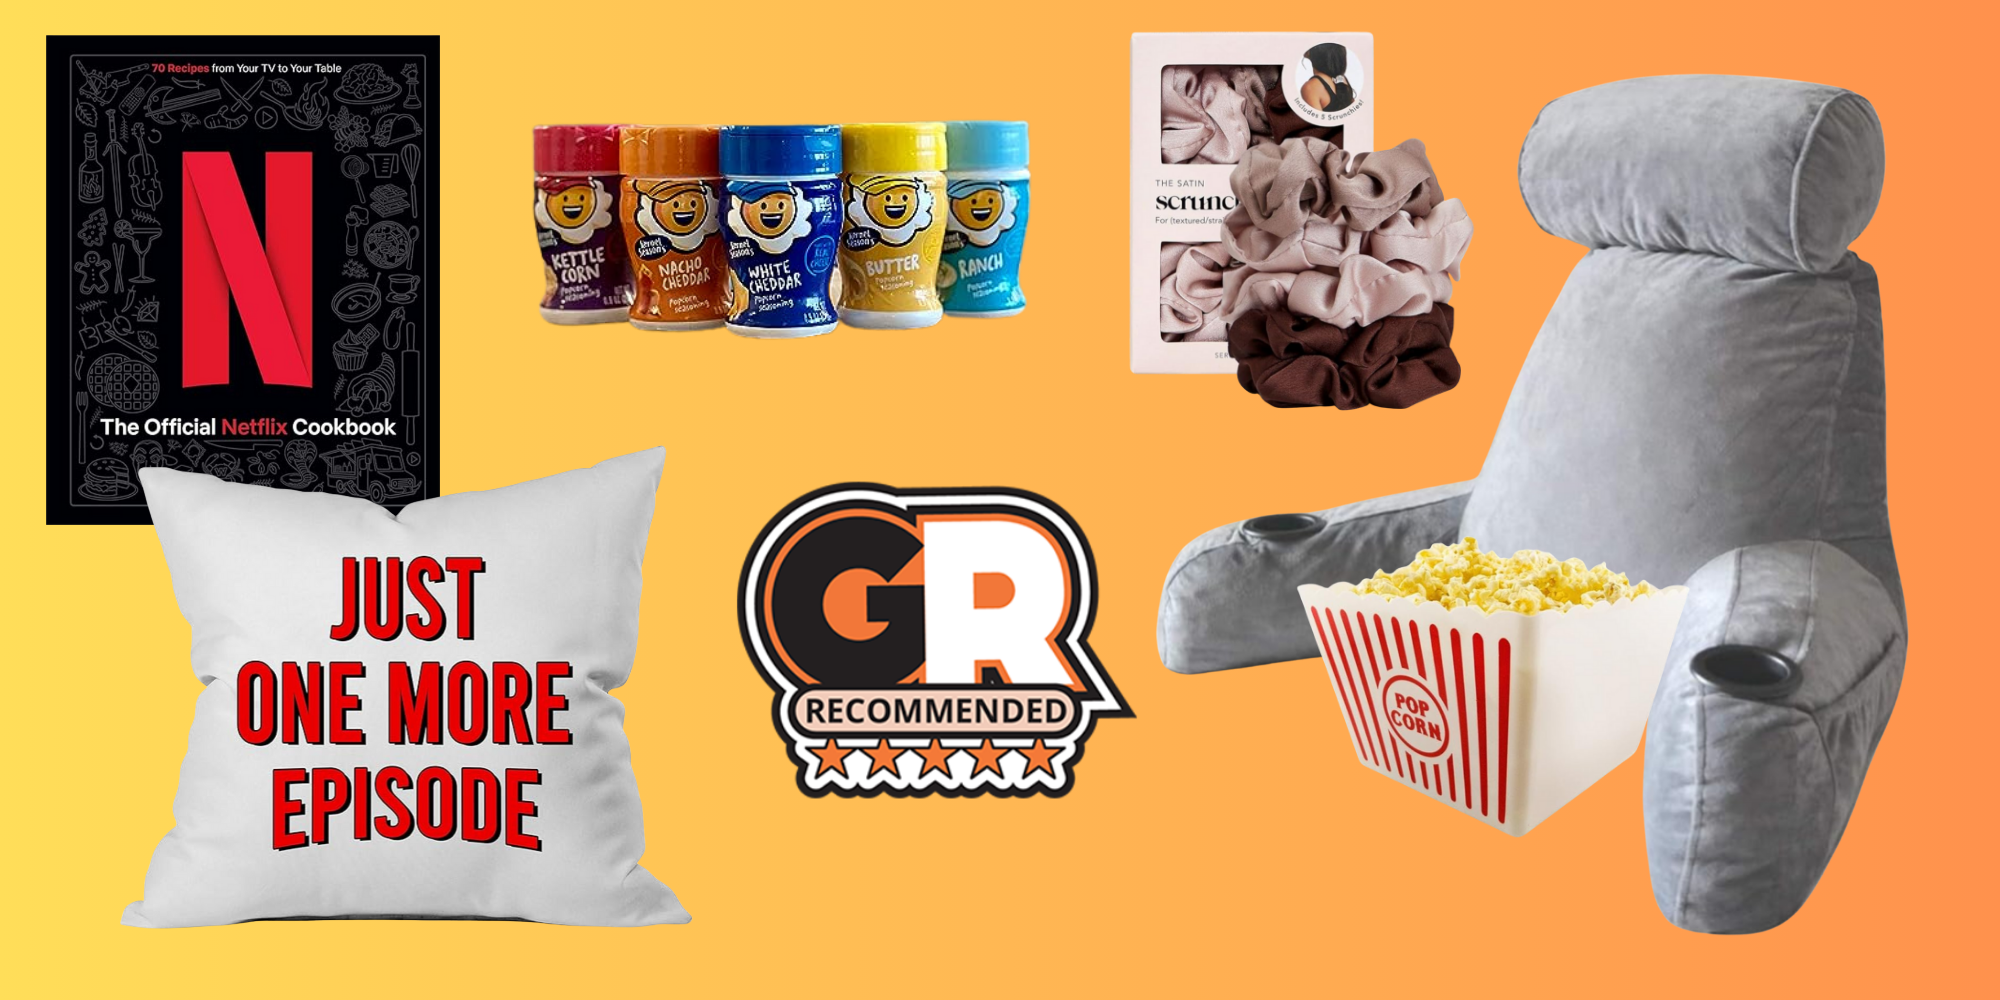 This image features a variety of products that aid in binge-watching Netflix shows and movies